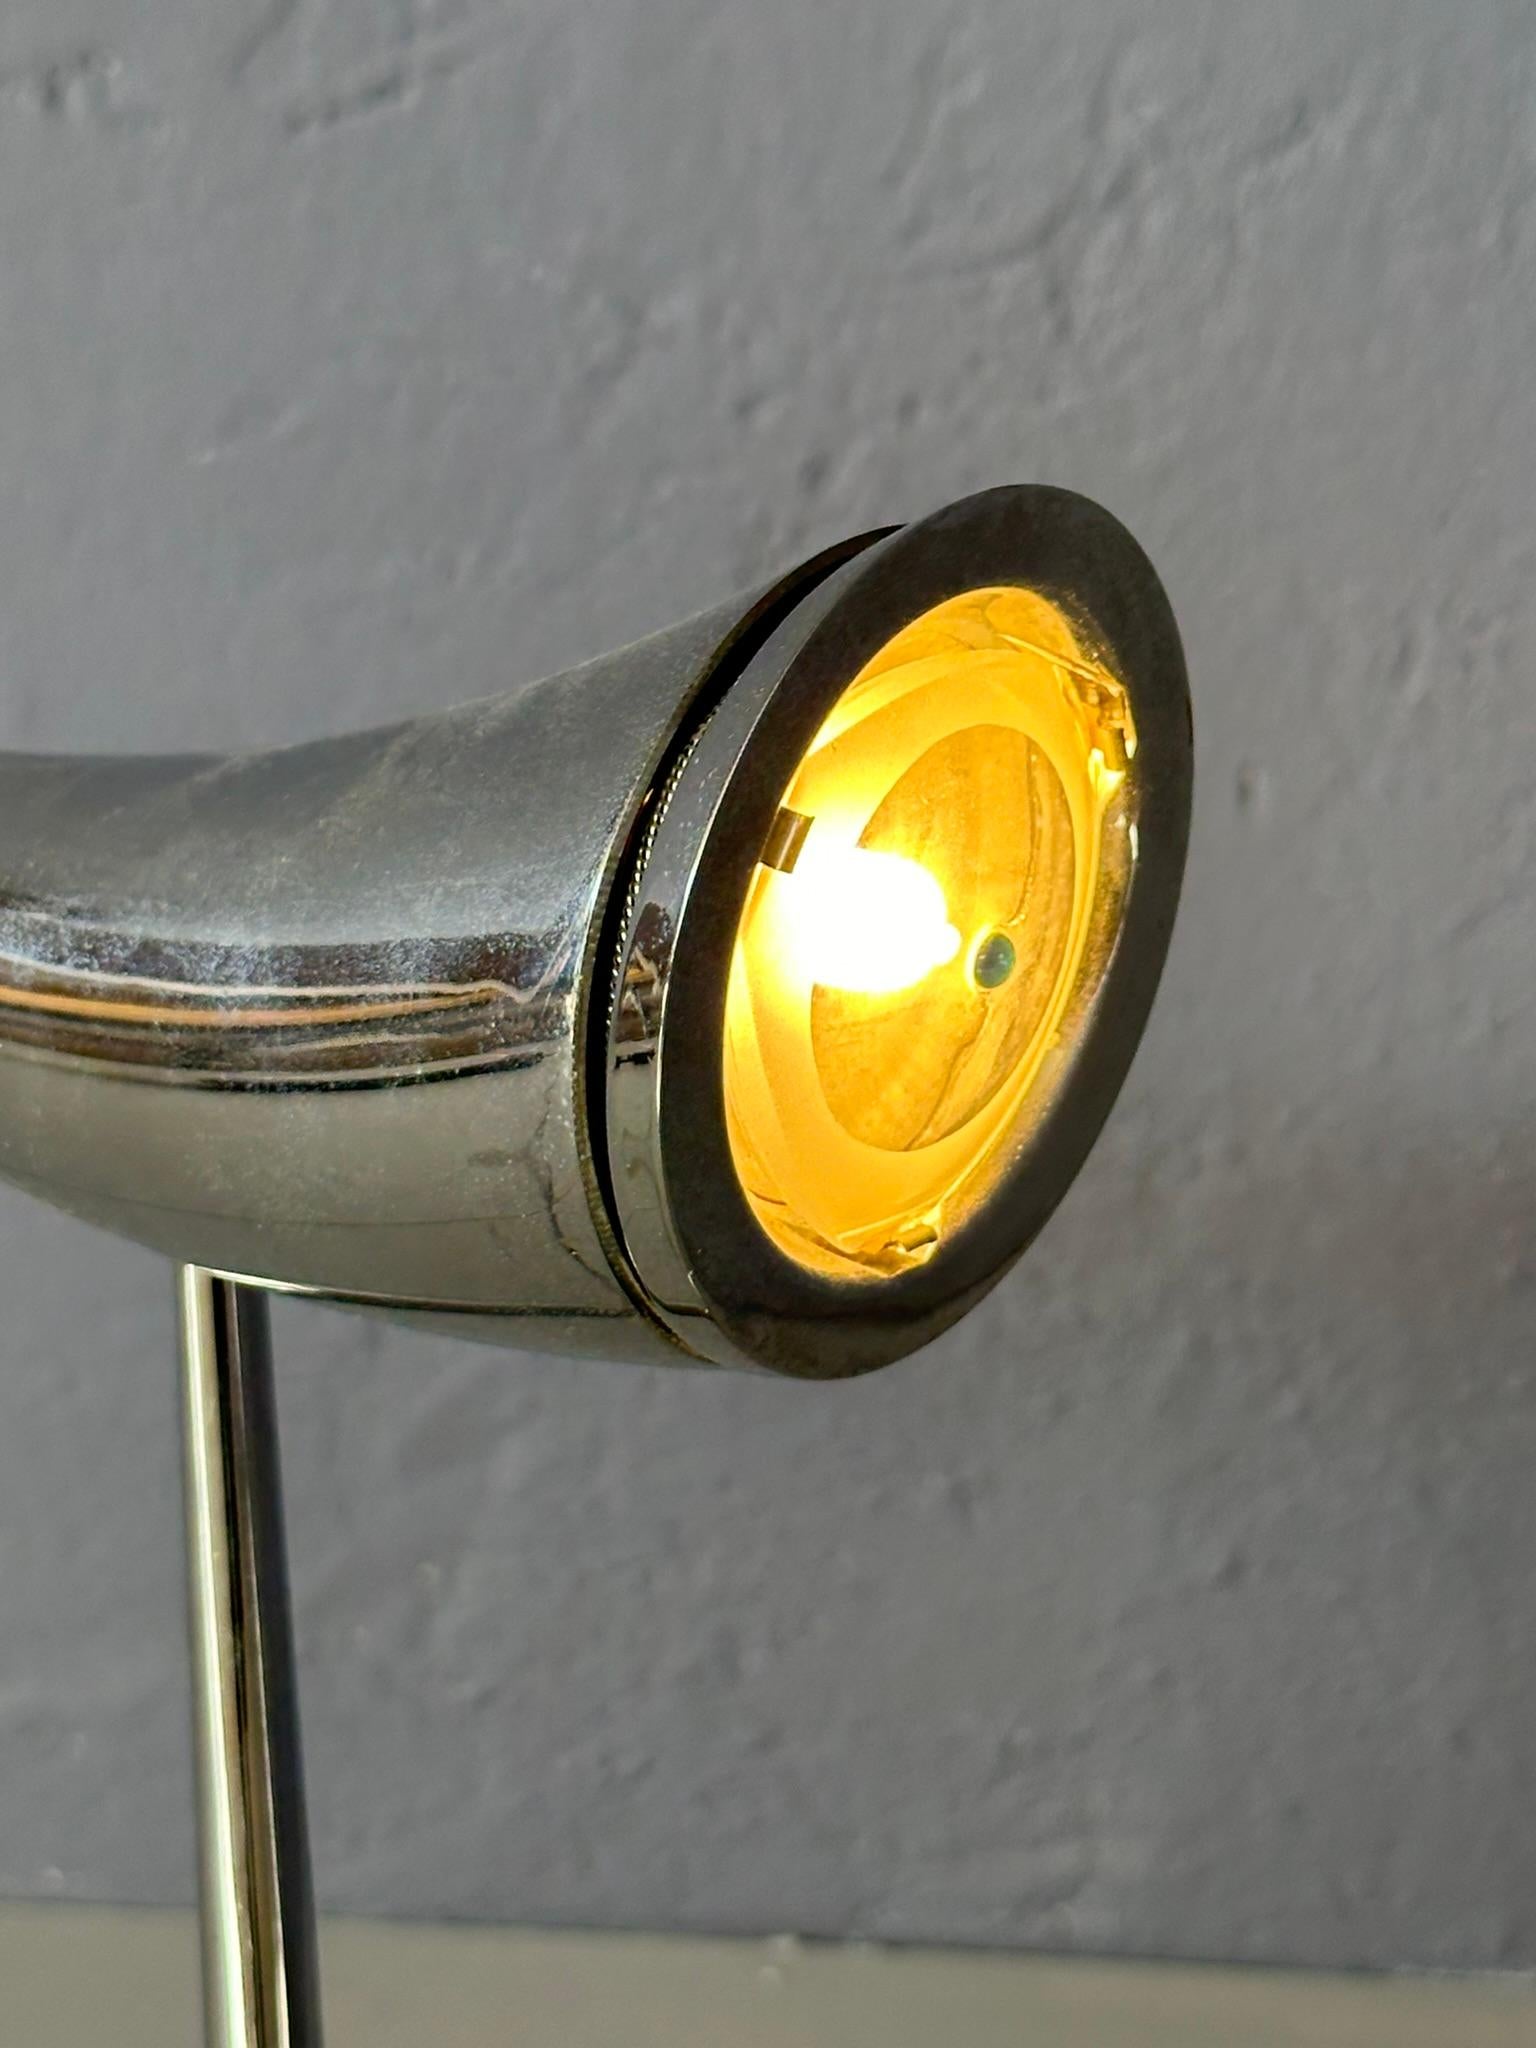 Mid-Century Modern Table Lamp 'ARA', design by Phiiippe Starck for Flos, 1988, chromed steel, works For Sale